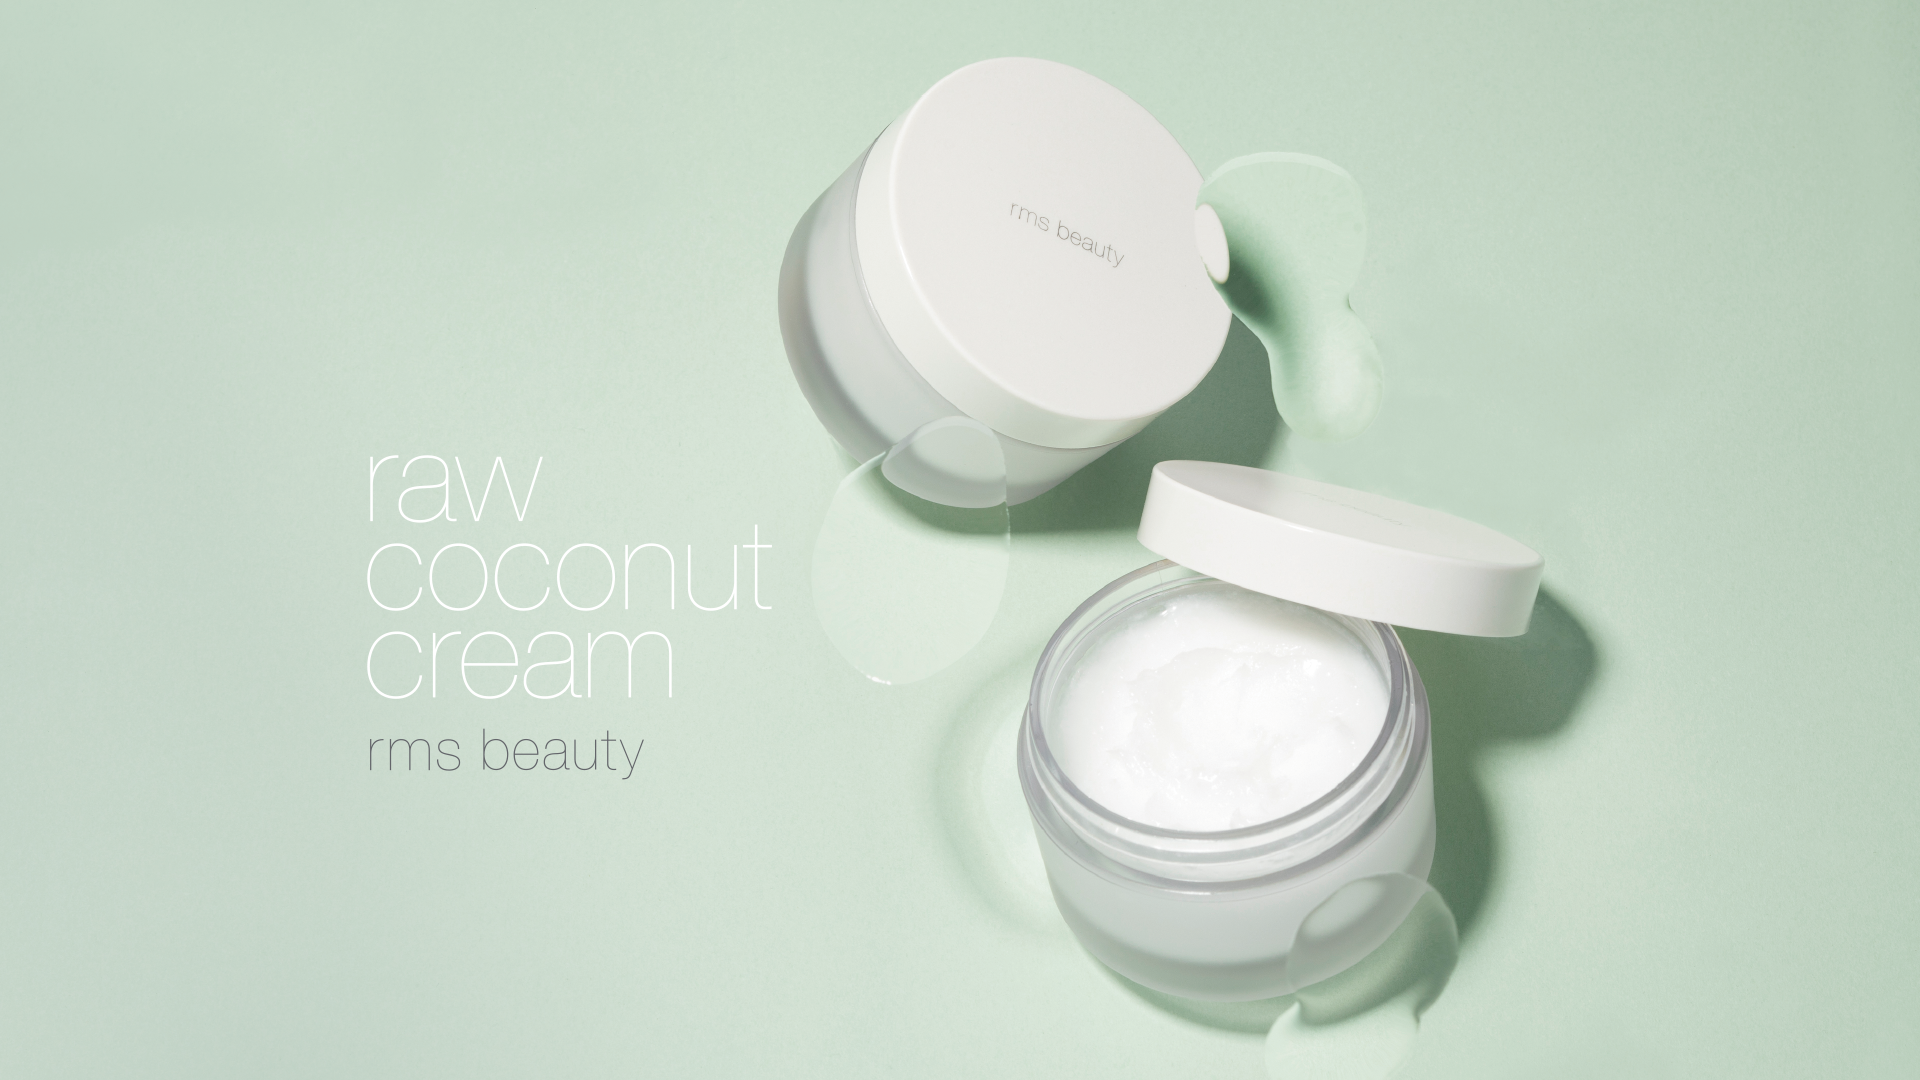 RAW COCONUT CREAM Less is more skin care item rms beauty